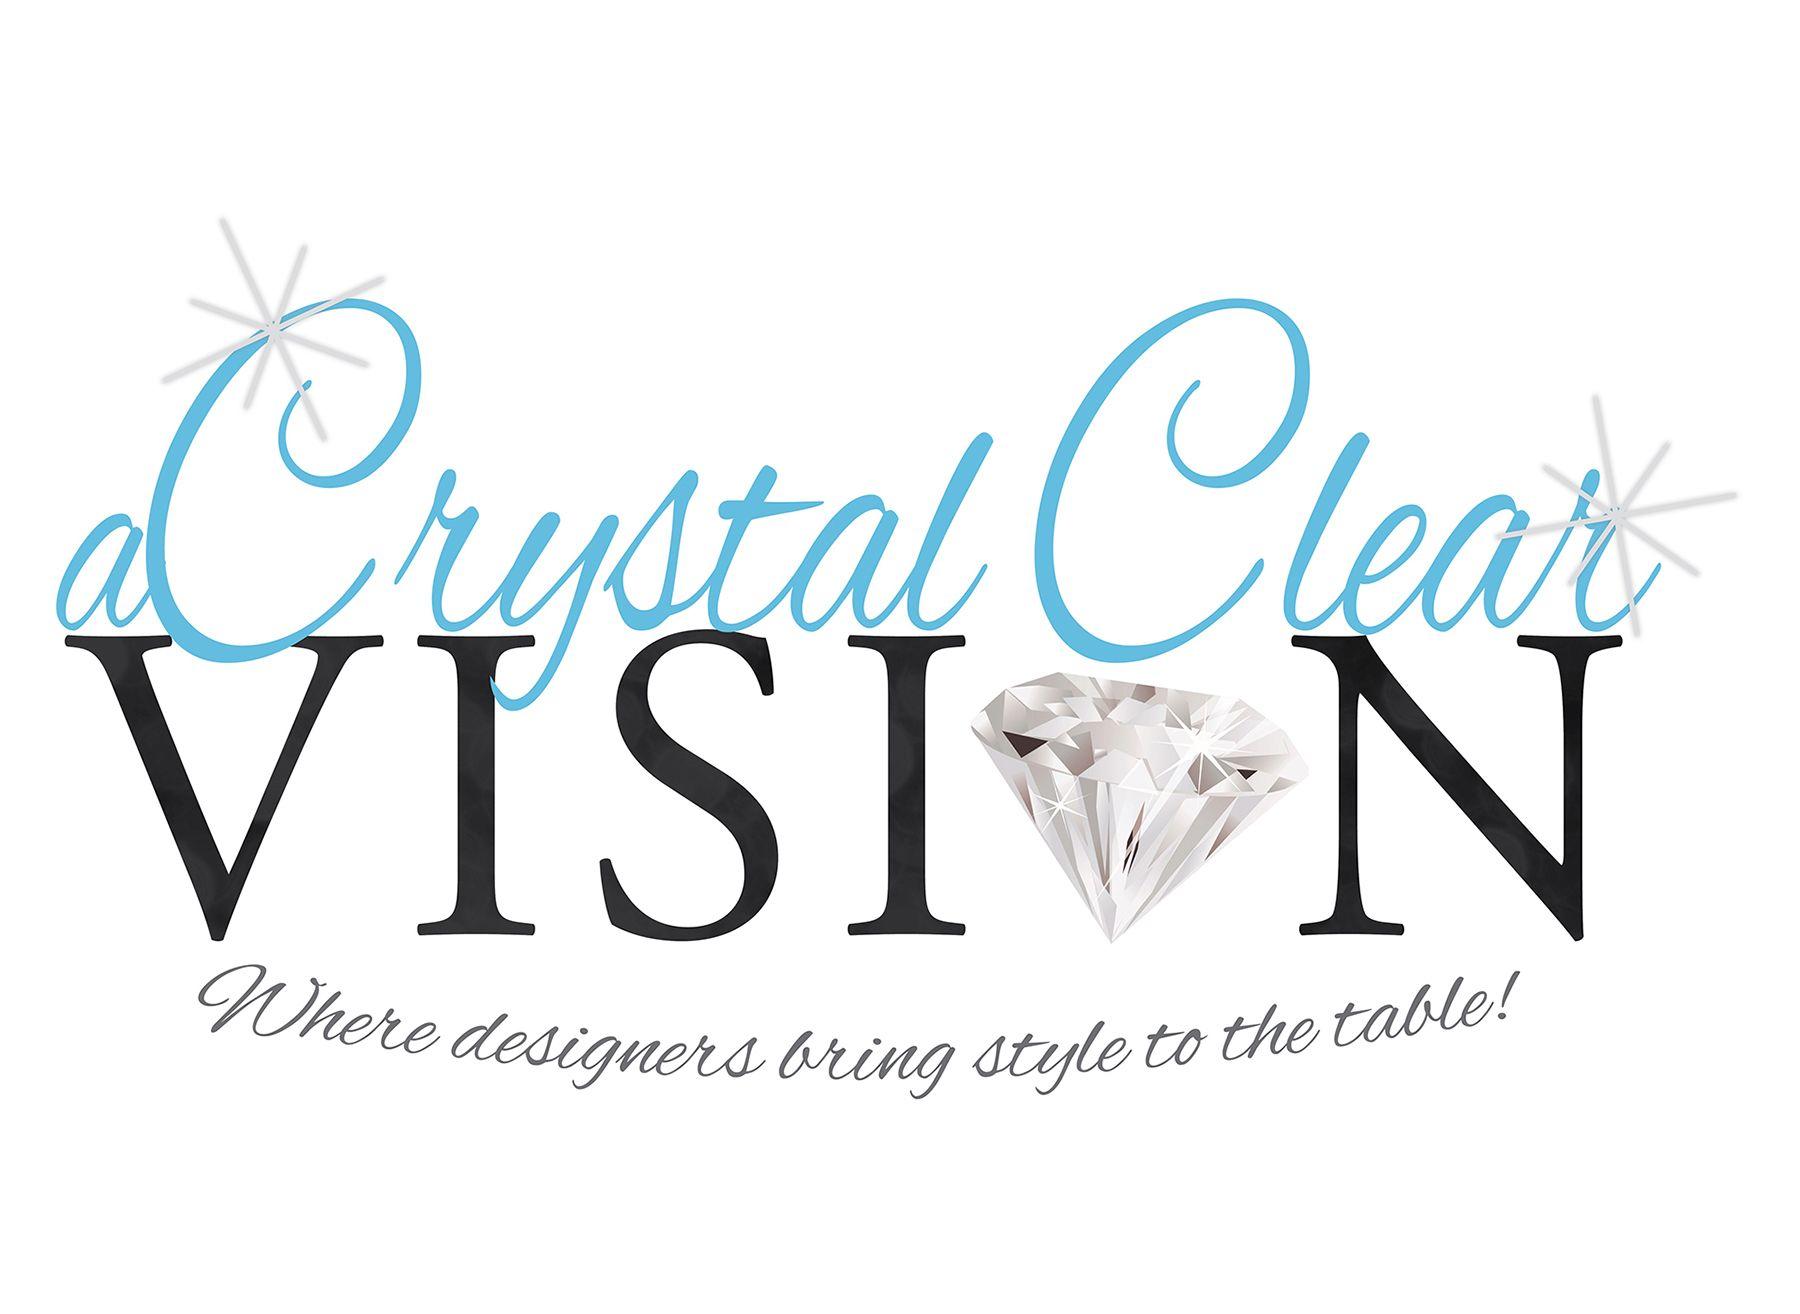 Crystal Clear Logo - ViewitDoit.com - 2017 Crystal Clear Vision Event